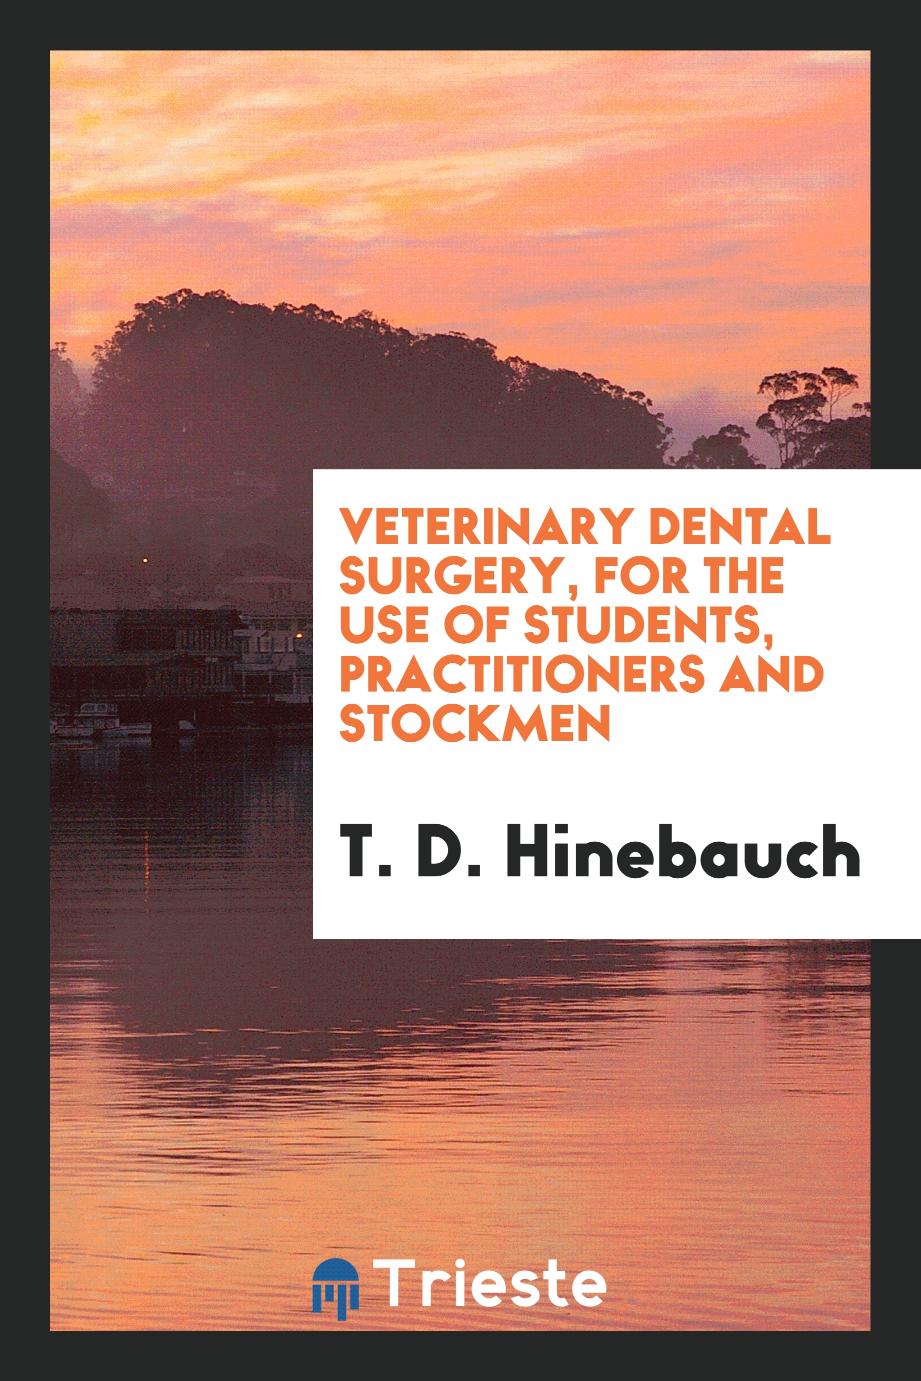 Veterinary dental surgery, for the use of students, practitioners and stockmen